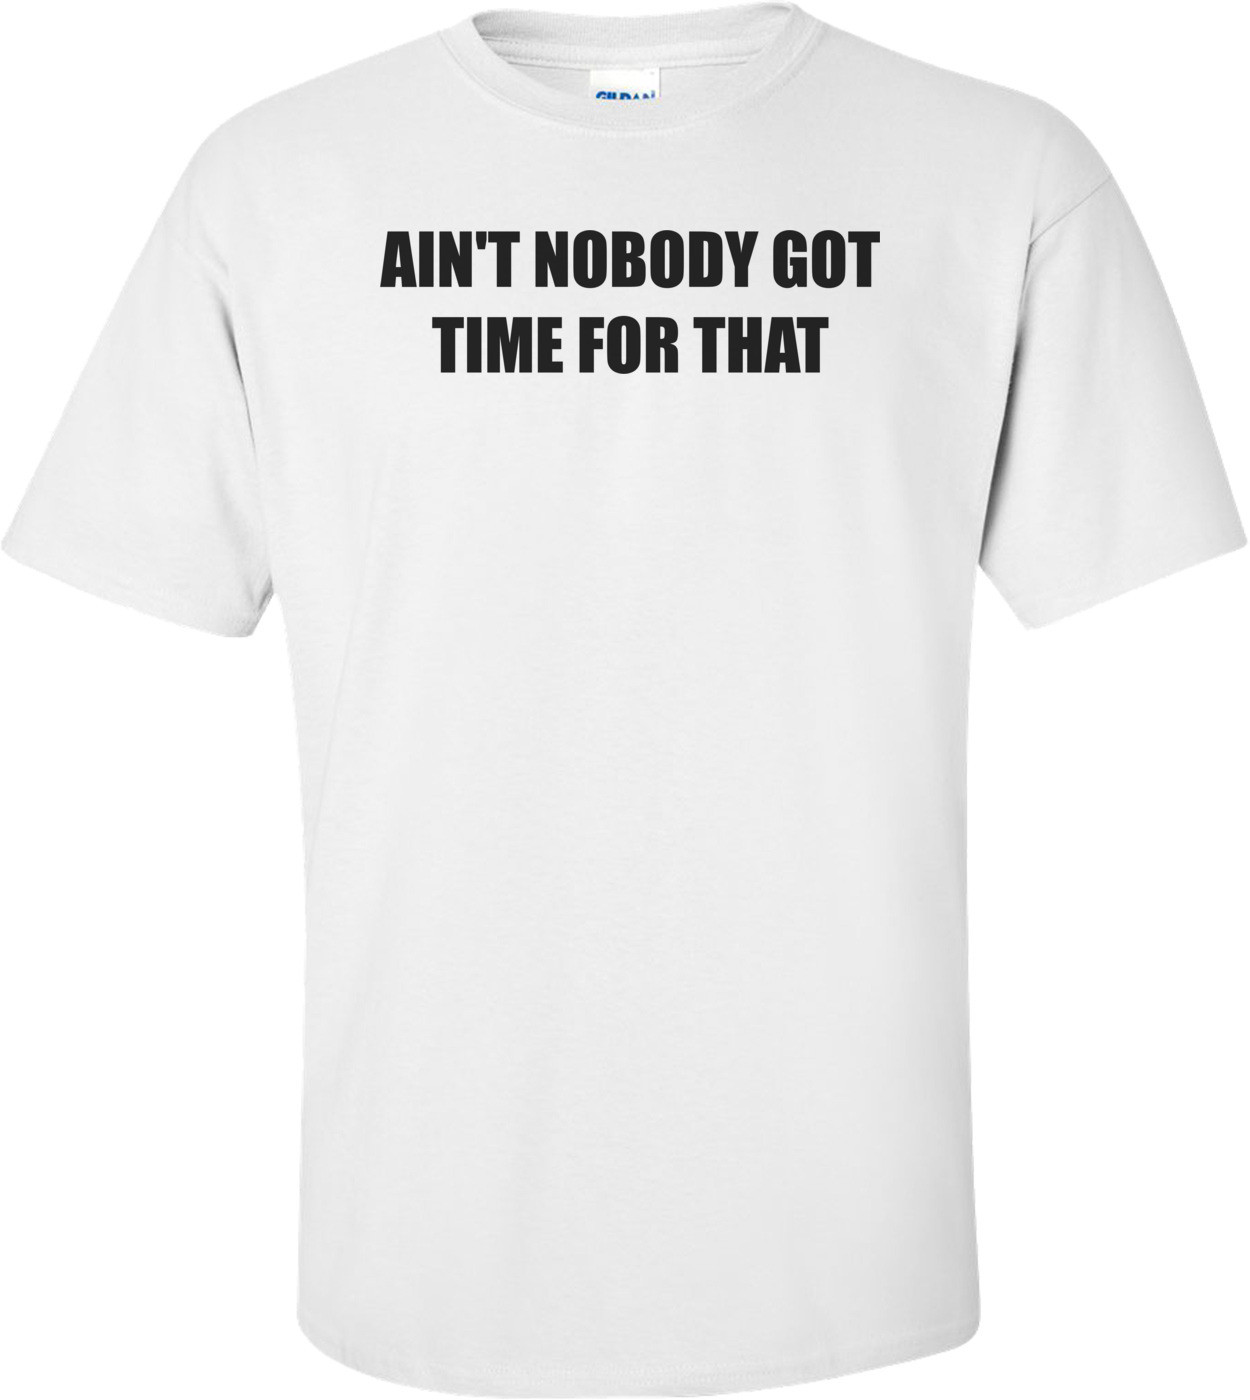 AIN'T NOBODY GOT TIME FOR THAT Shirt